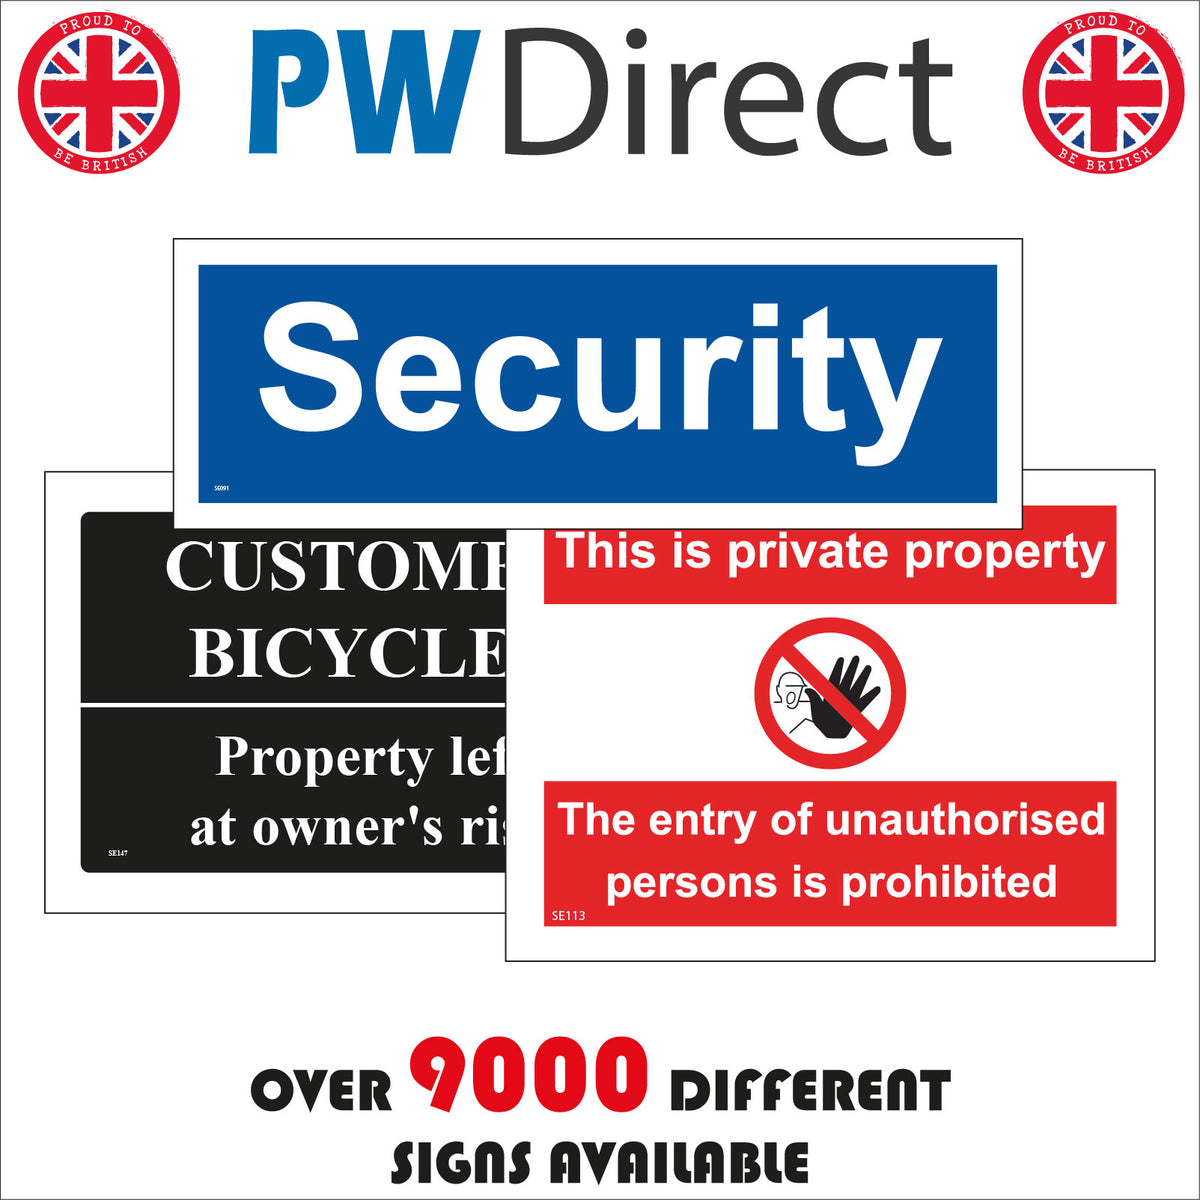 Important Please Lock This Door After Use Safety Entry – PWDirect